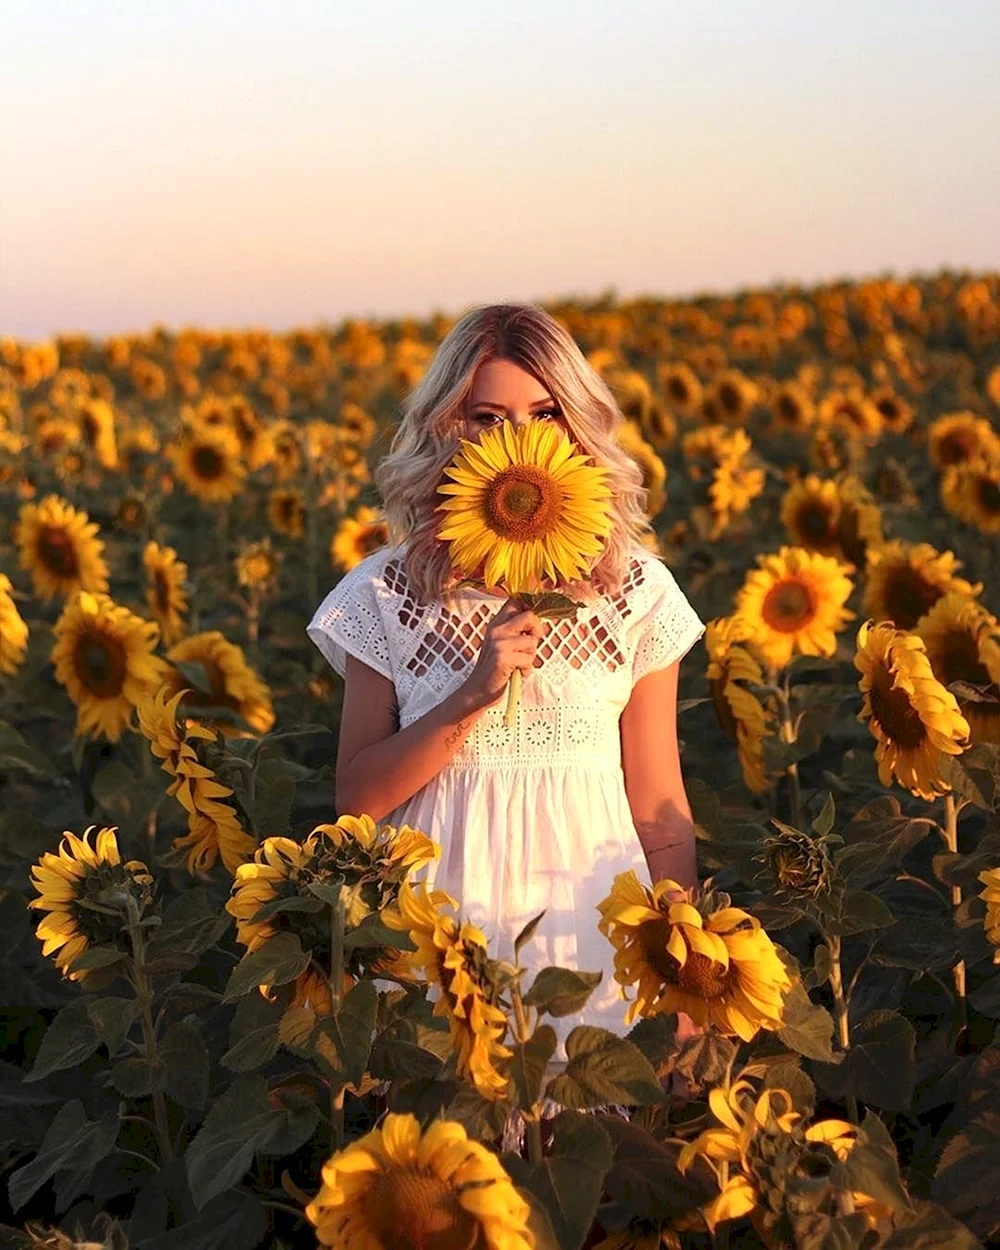 Sunflower with girl